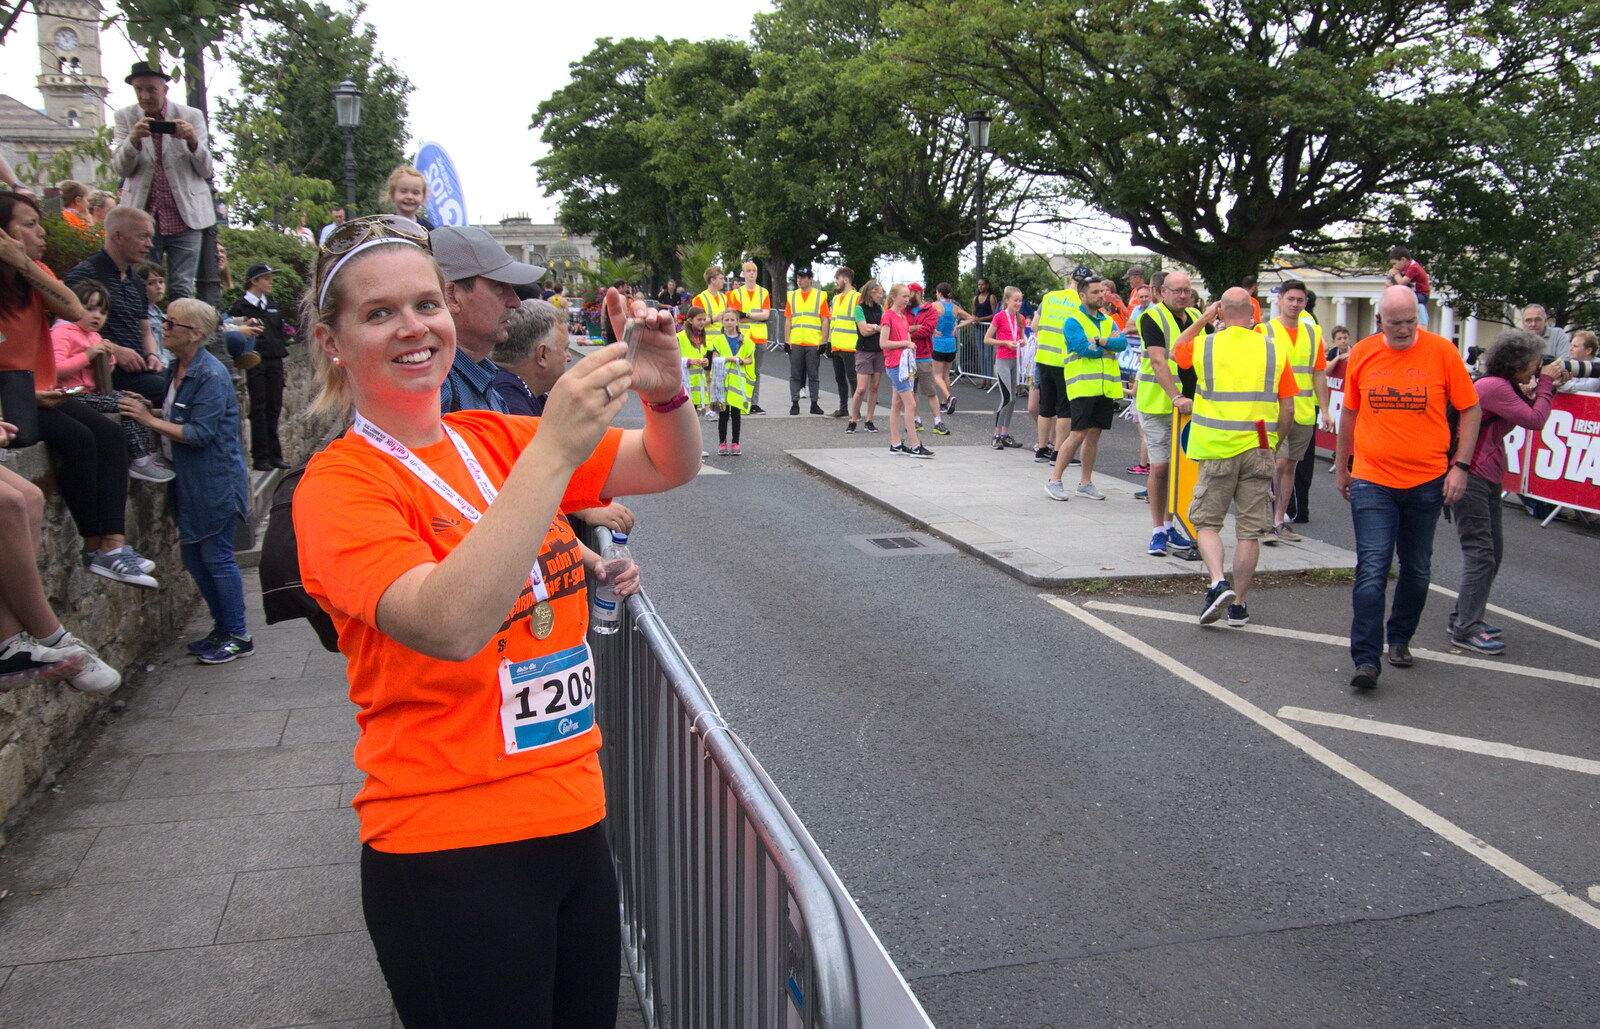 A woman from the US waits for her sister from The Dún Laoghaire 10k Run, County Dublin, Ireland - 6th August 2018